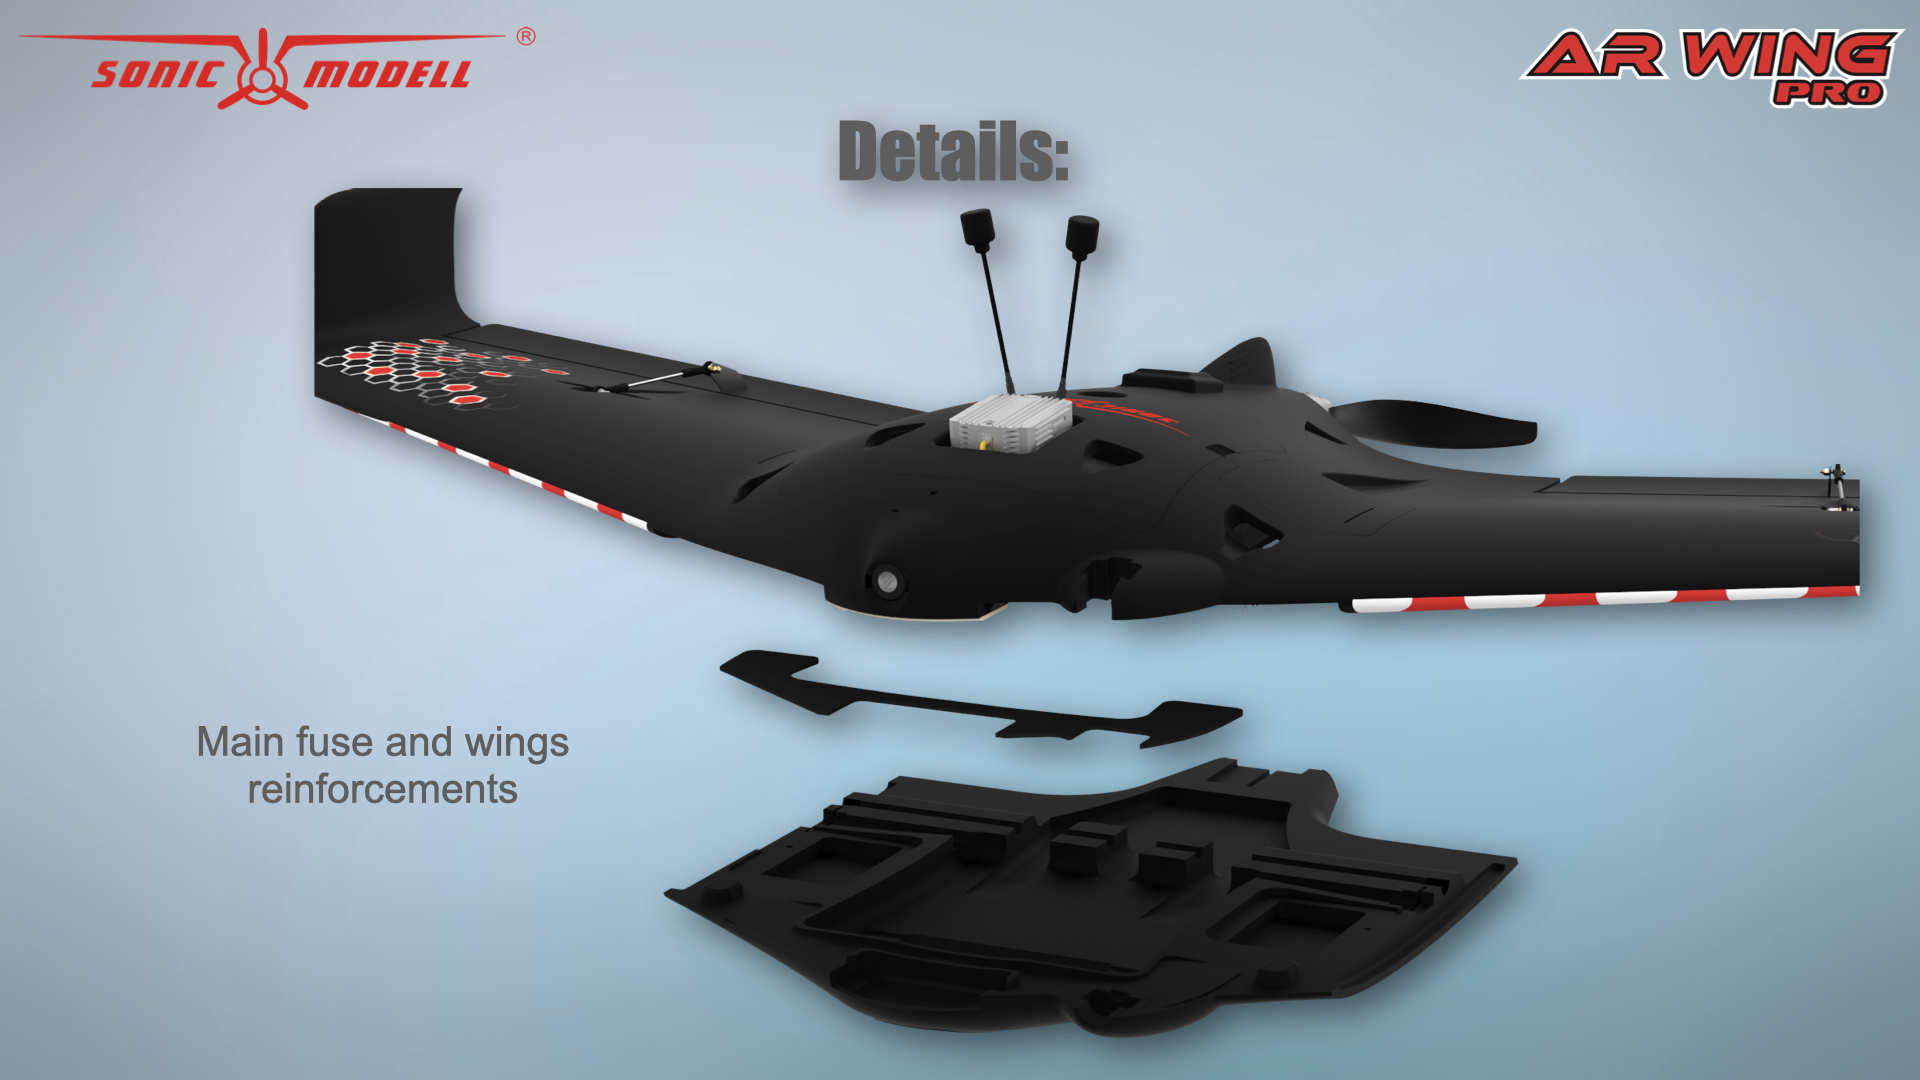 Sonicmodell-AR-Wing-Pro-1000mm-Wingspan-EPP-FPV-Flying-Wing-RC-Airplane-KITPNP-1756841-17